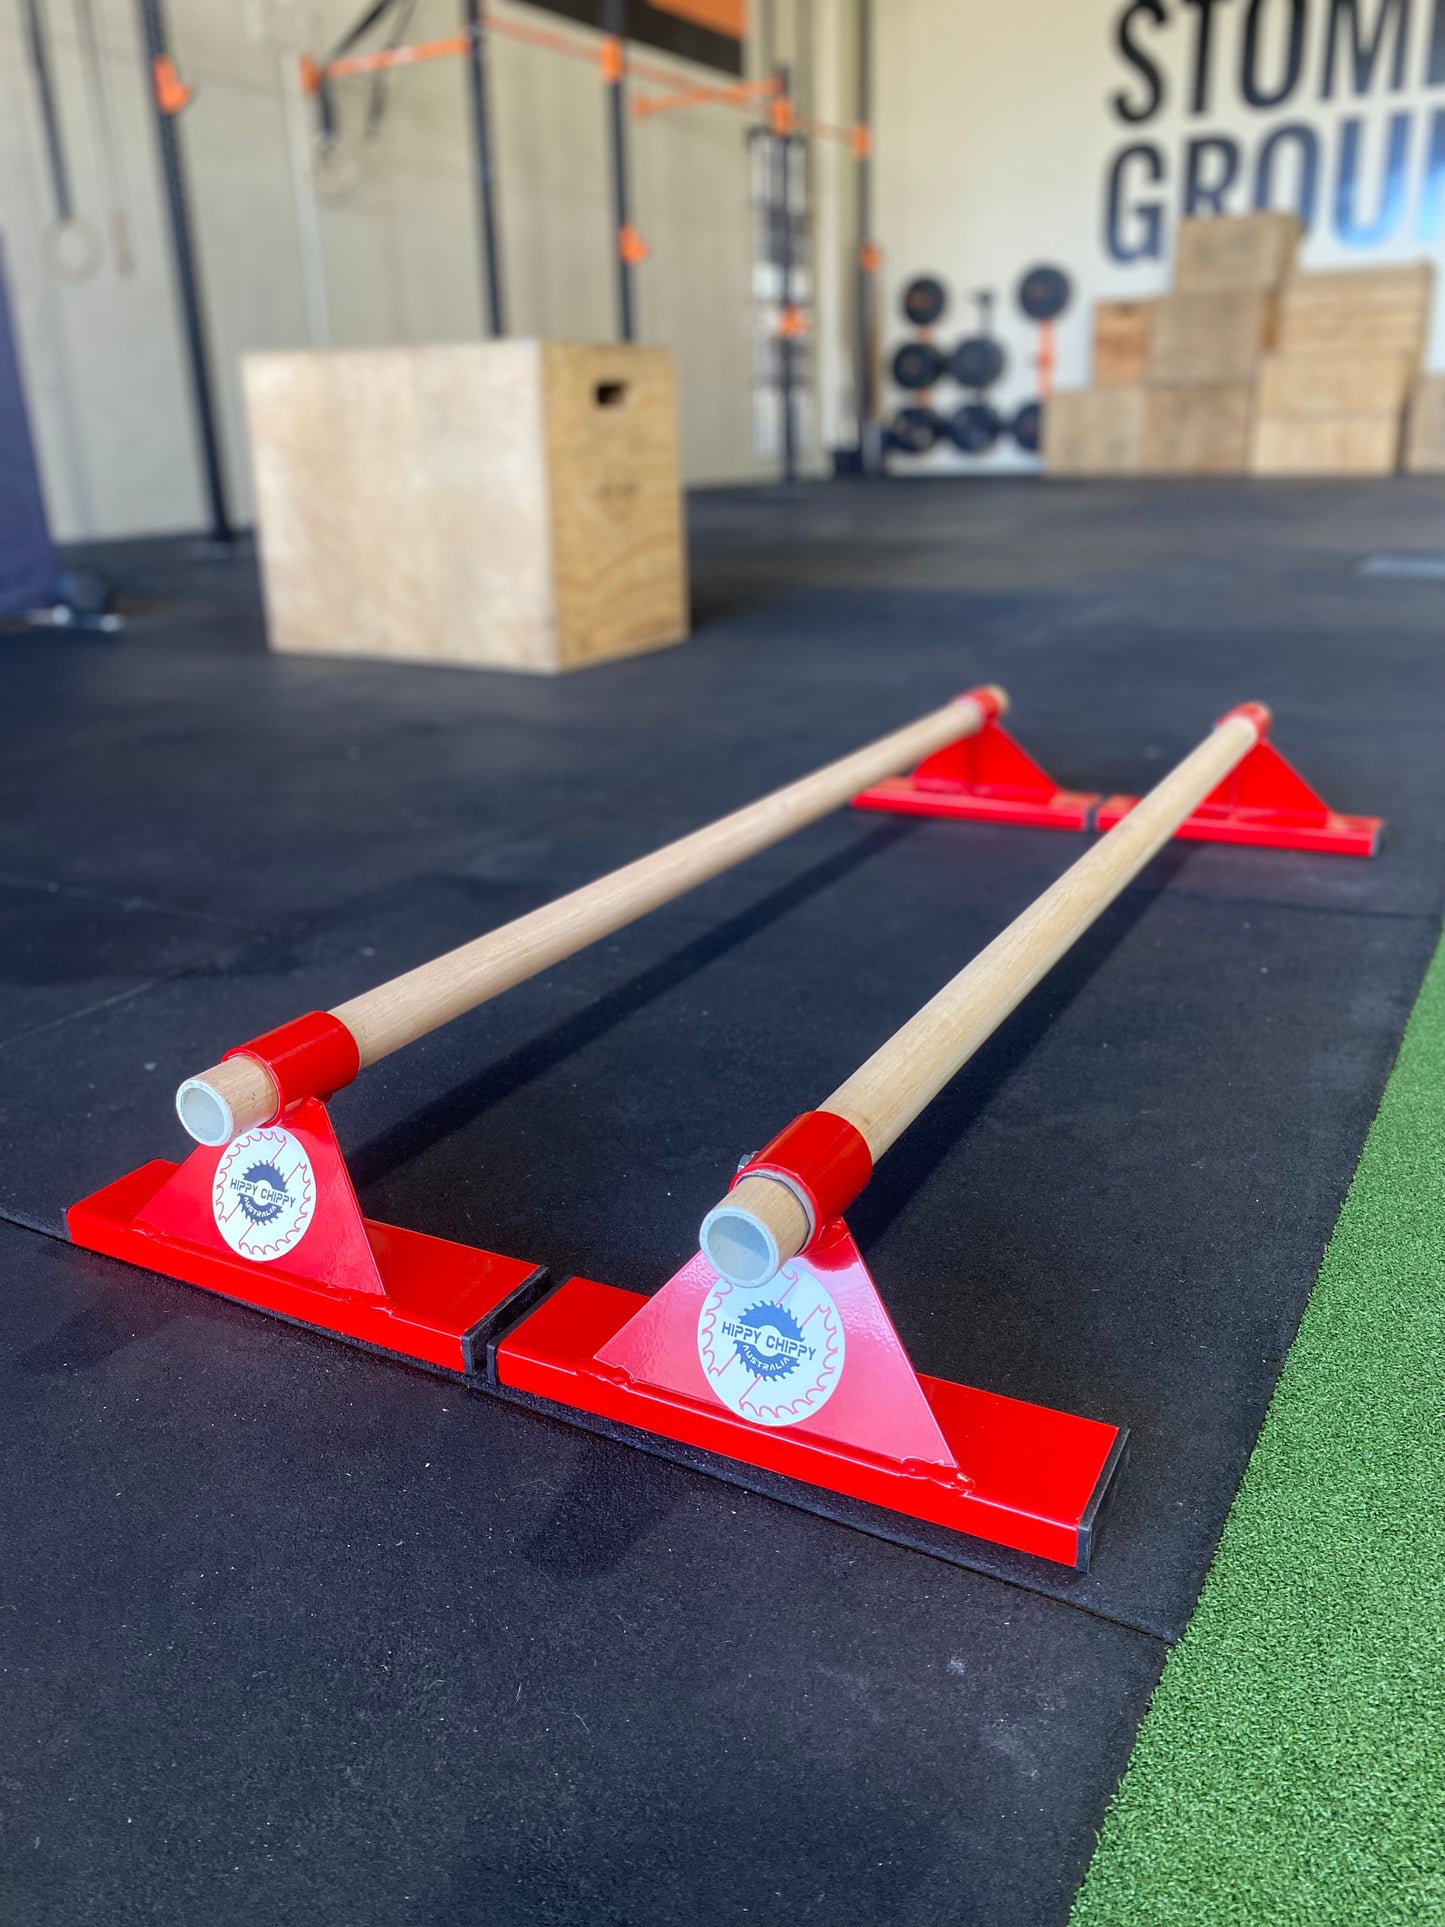 Low Parrallette Bars for Gymnastics and CrossFit